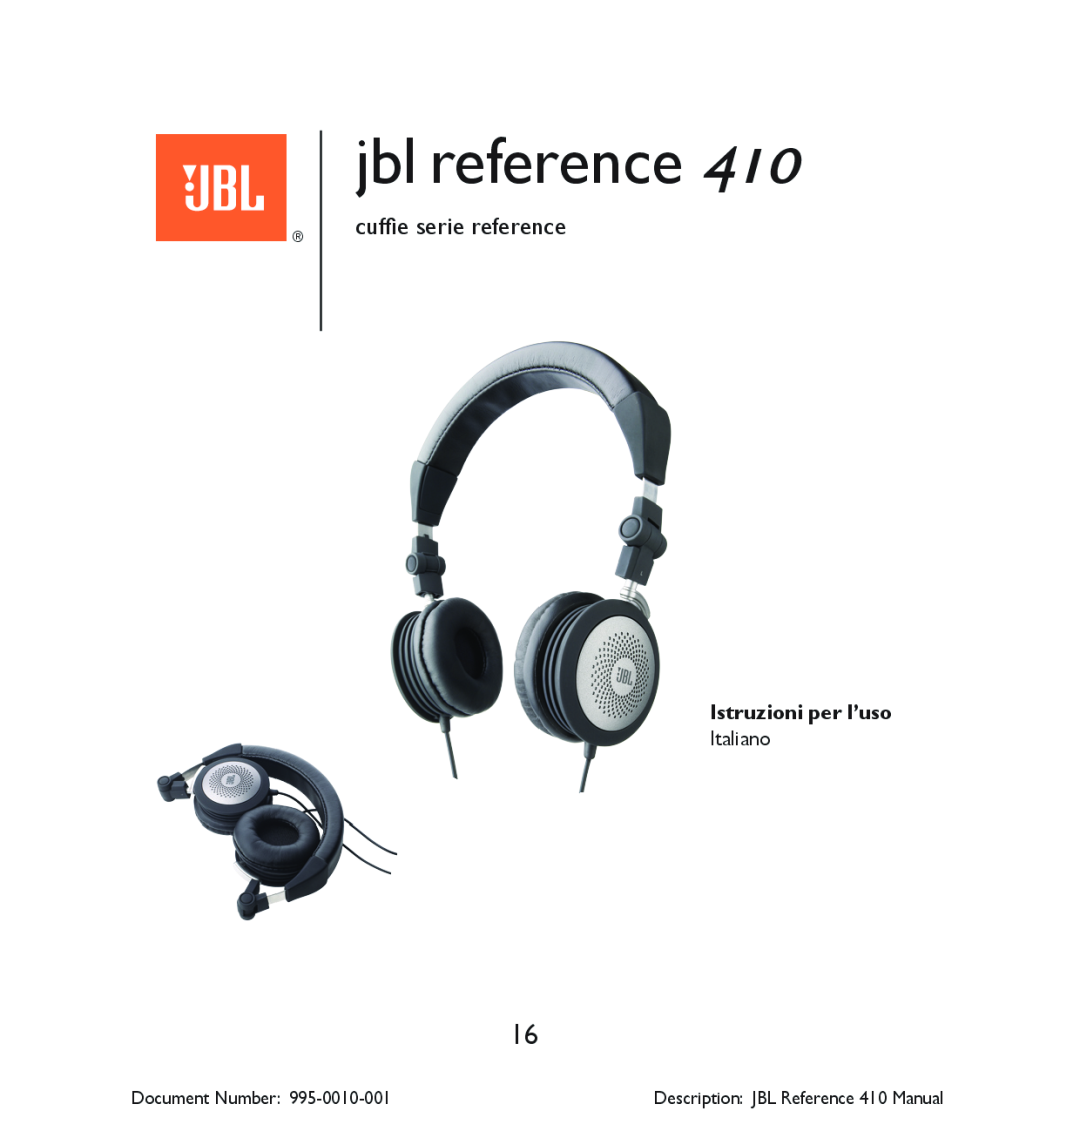 JBL cuffie serie reference, Istruzioni per l’uso, jbl reference, Document Number, Description JBL Reference 410 Manual 